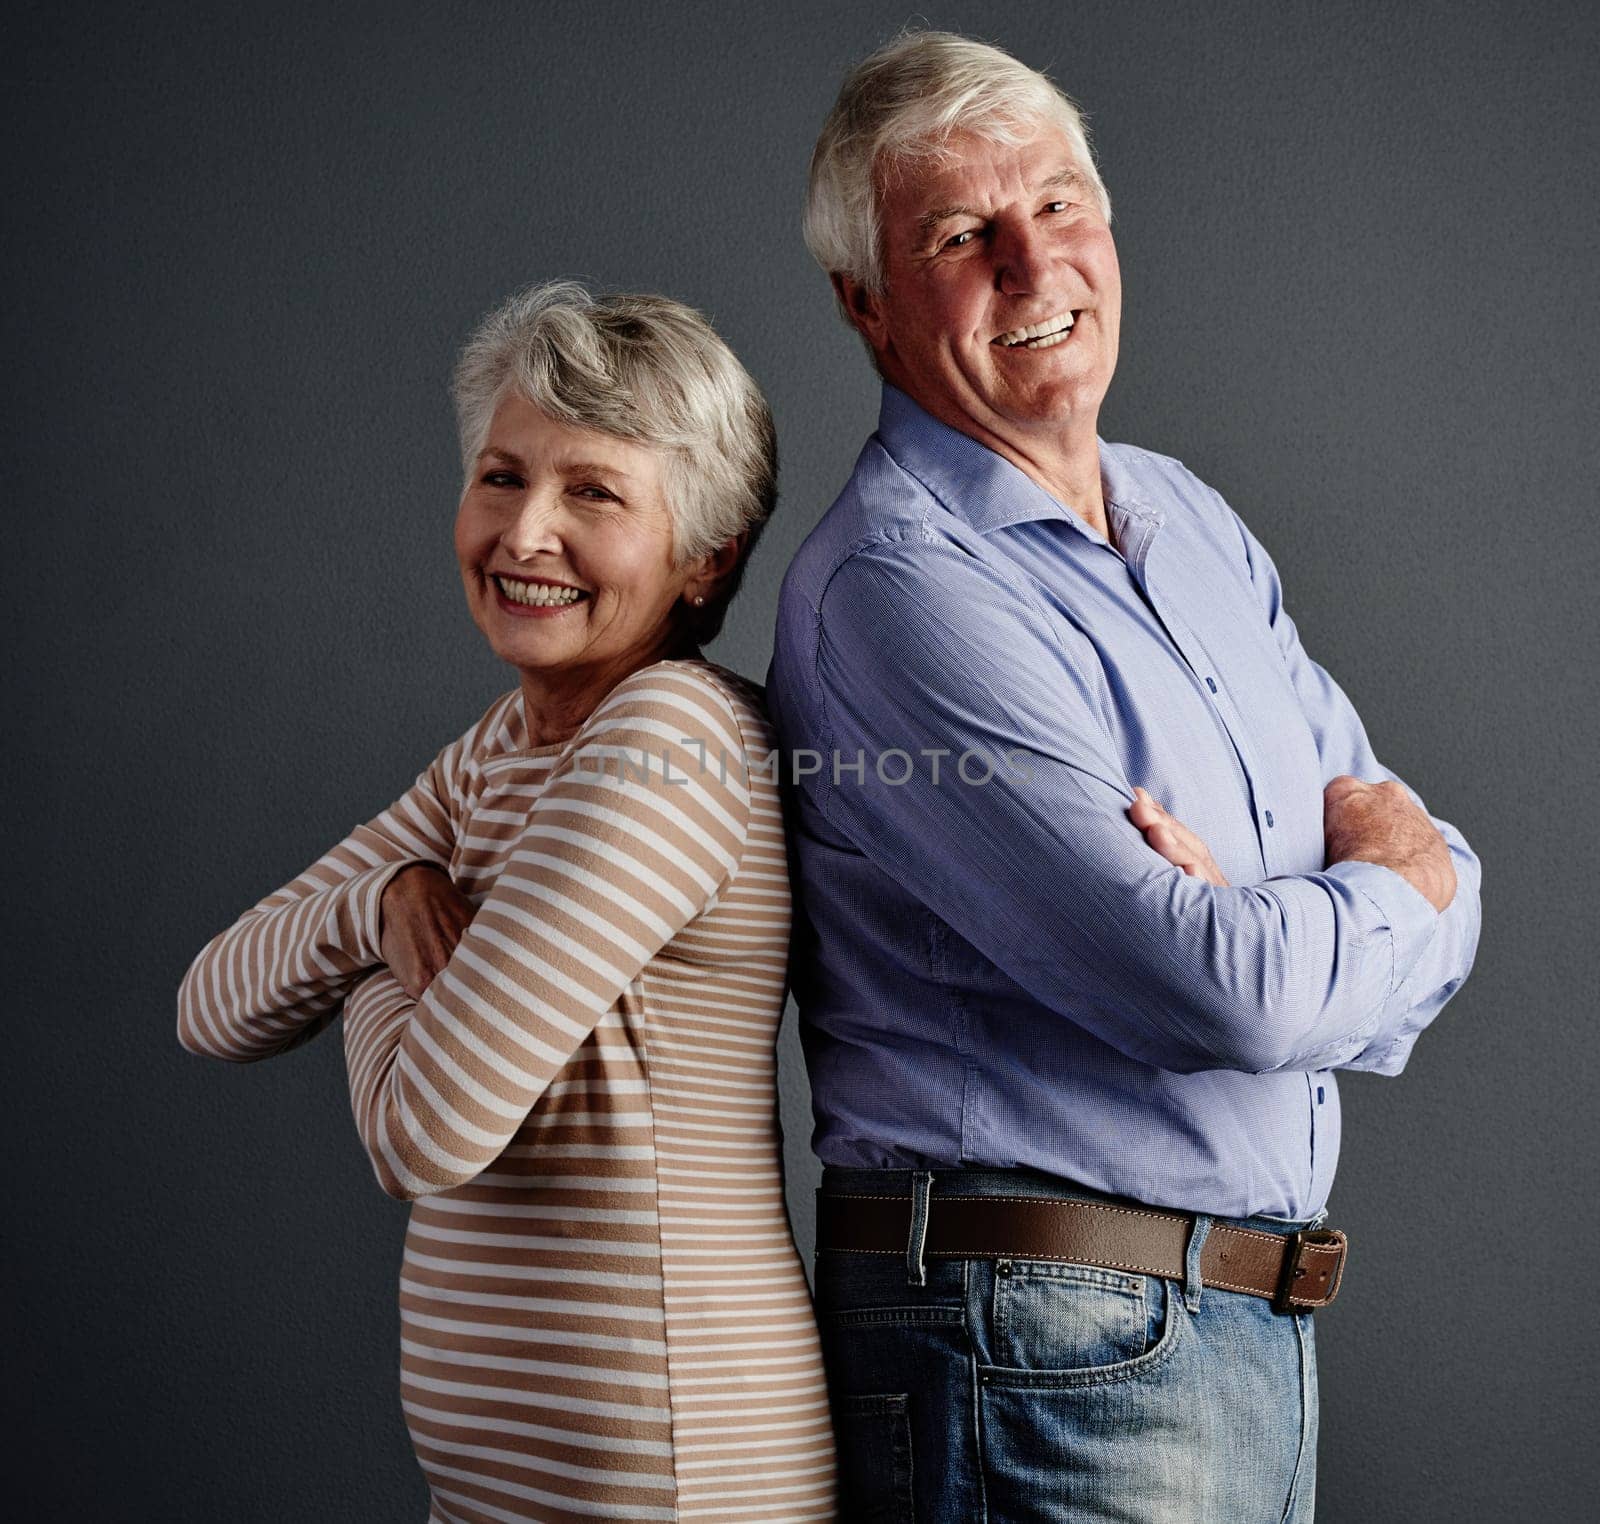 Ive got your back. Studio portrait of an affectionate senior couple posing against a grey background